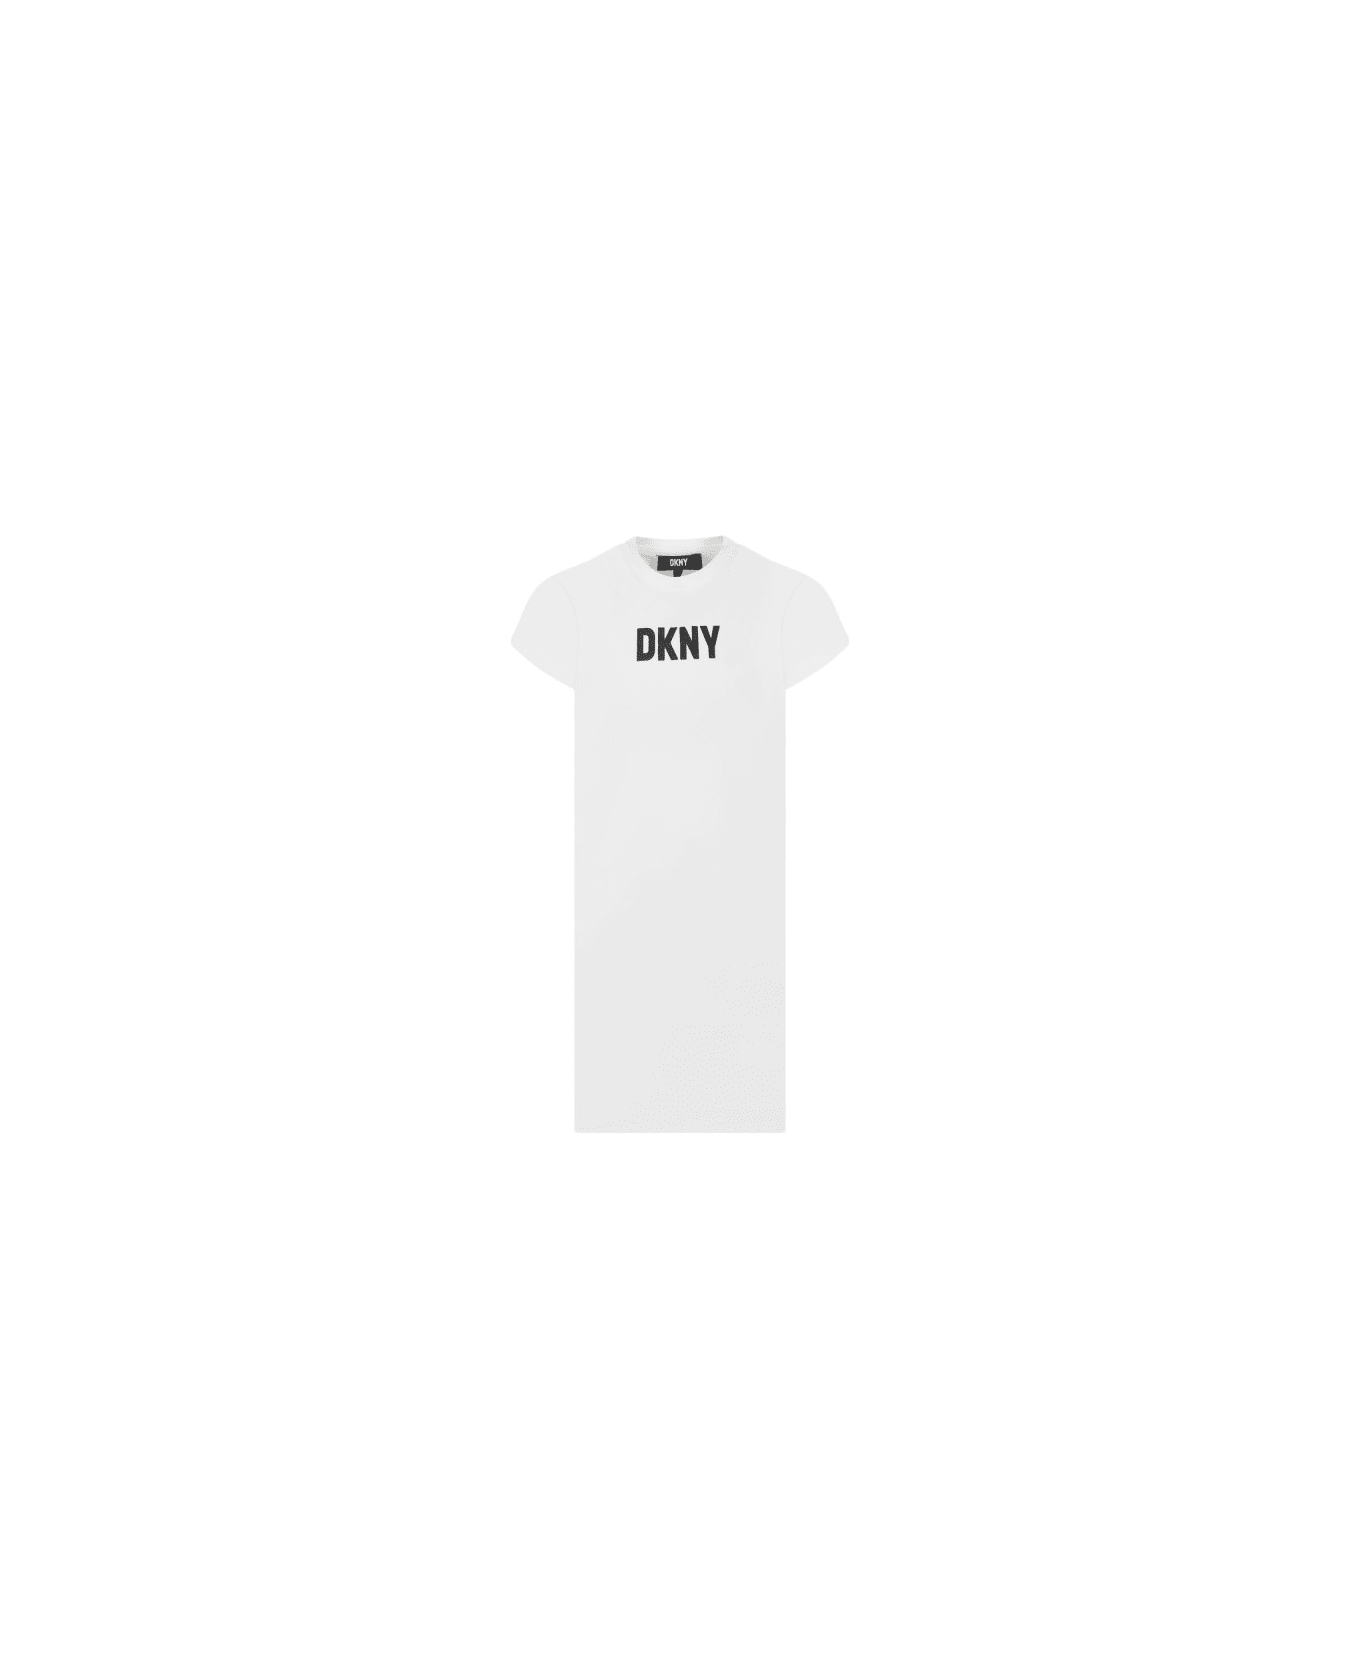 DKNY Complete With Logo - Black